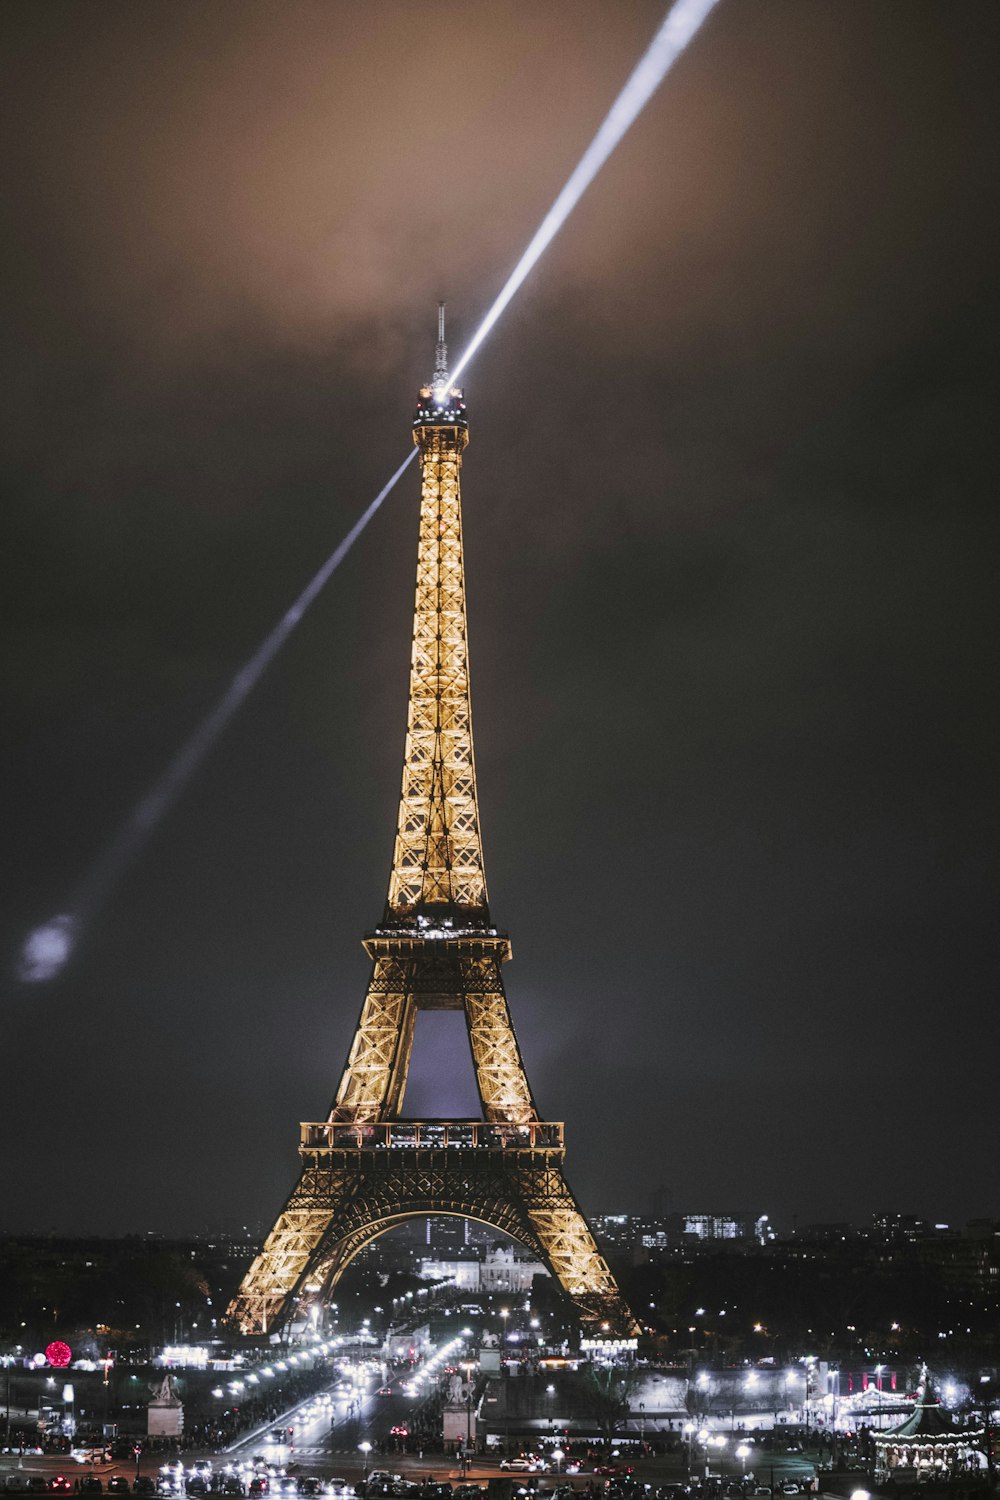 lighted Eiffel Tower of Paris during nighttime